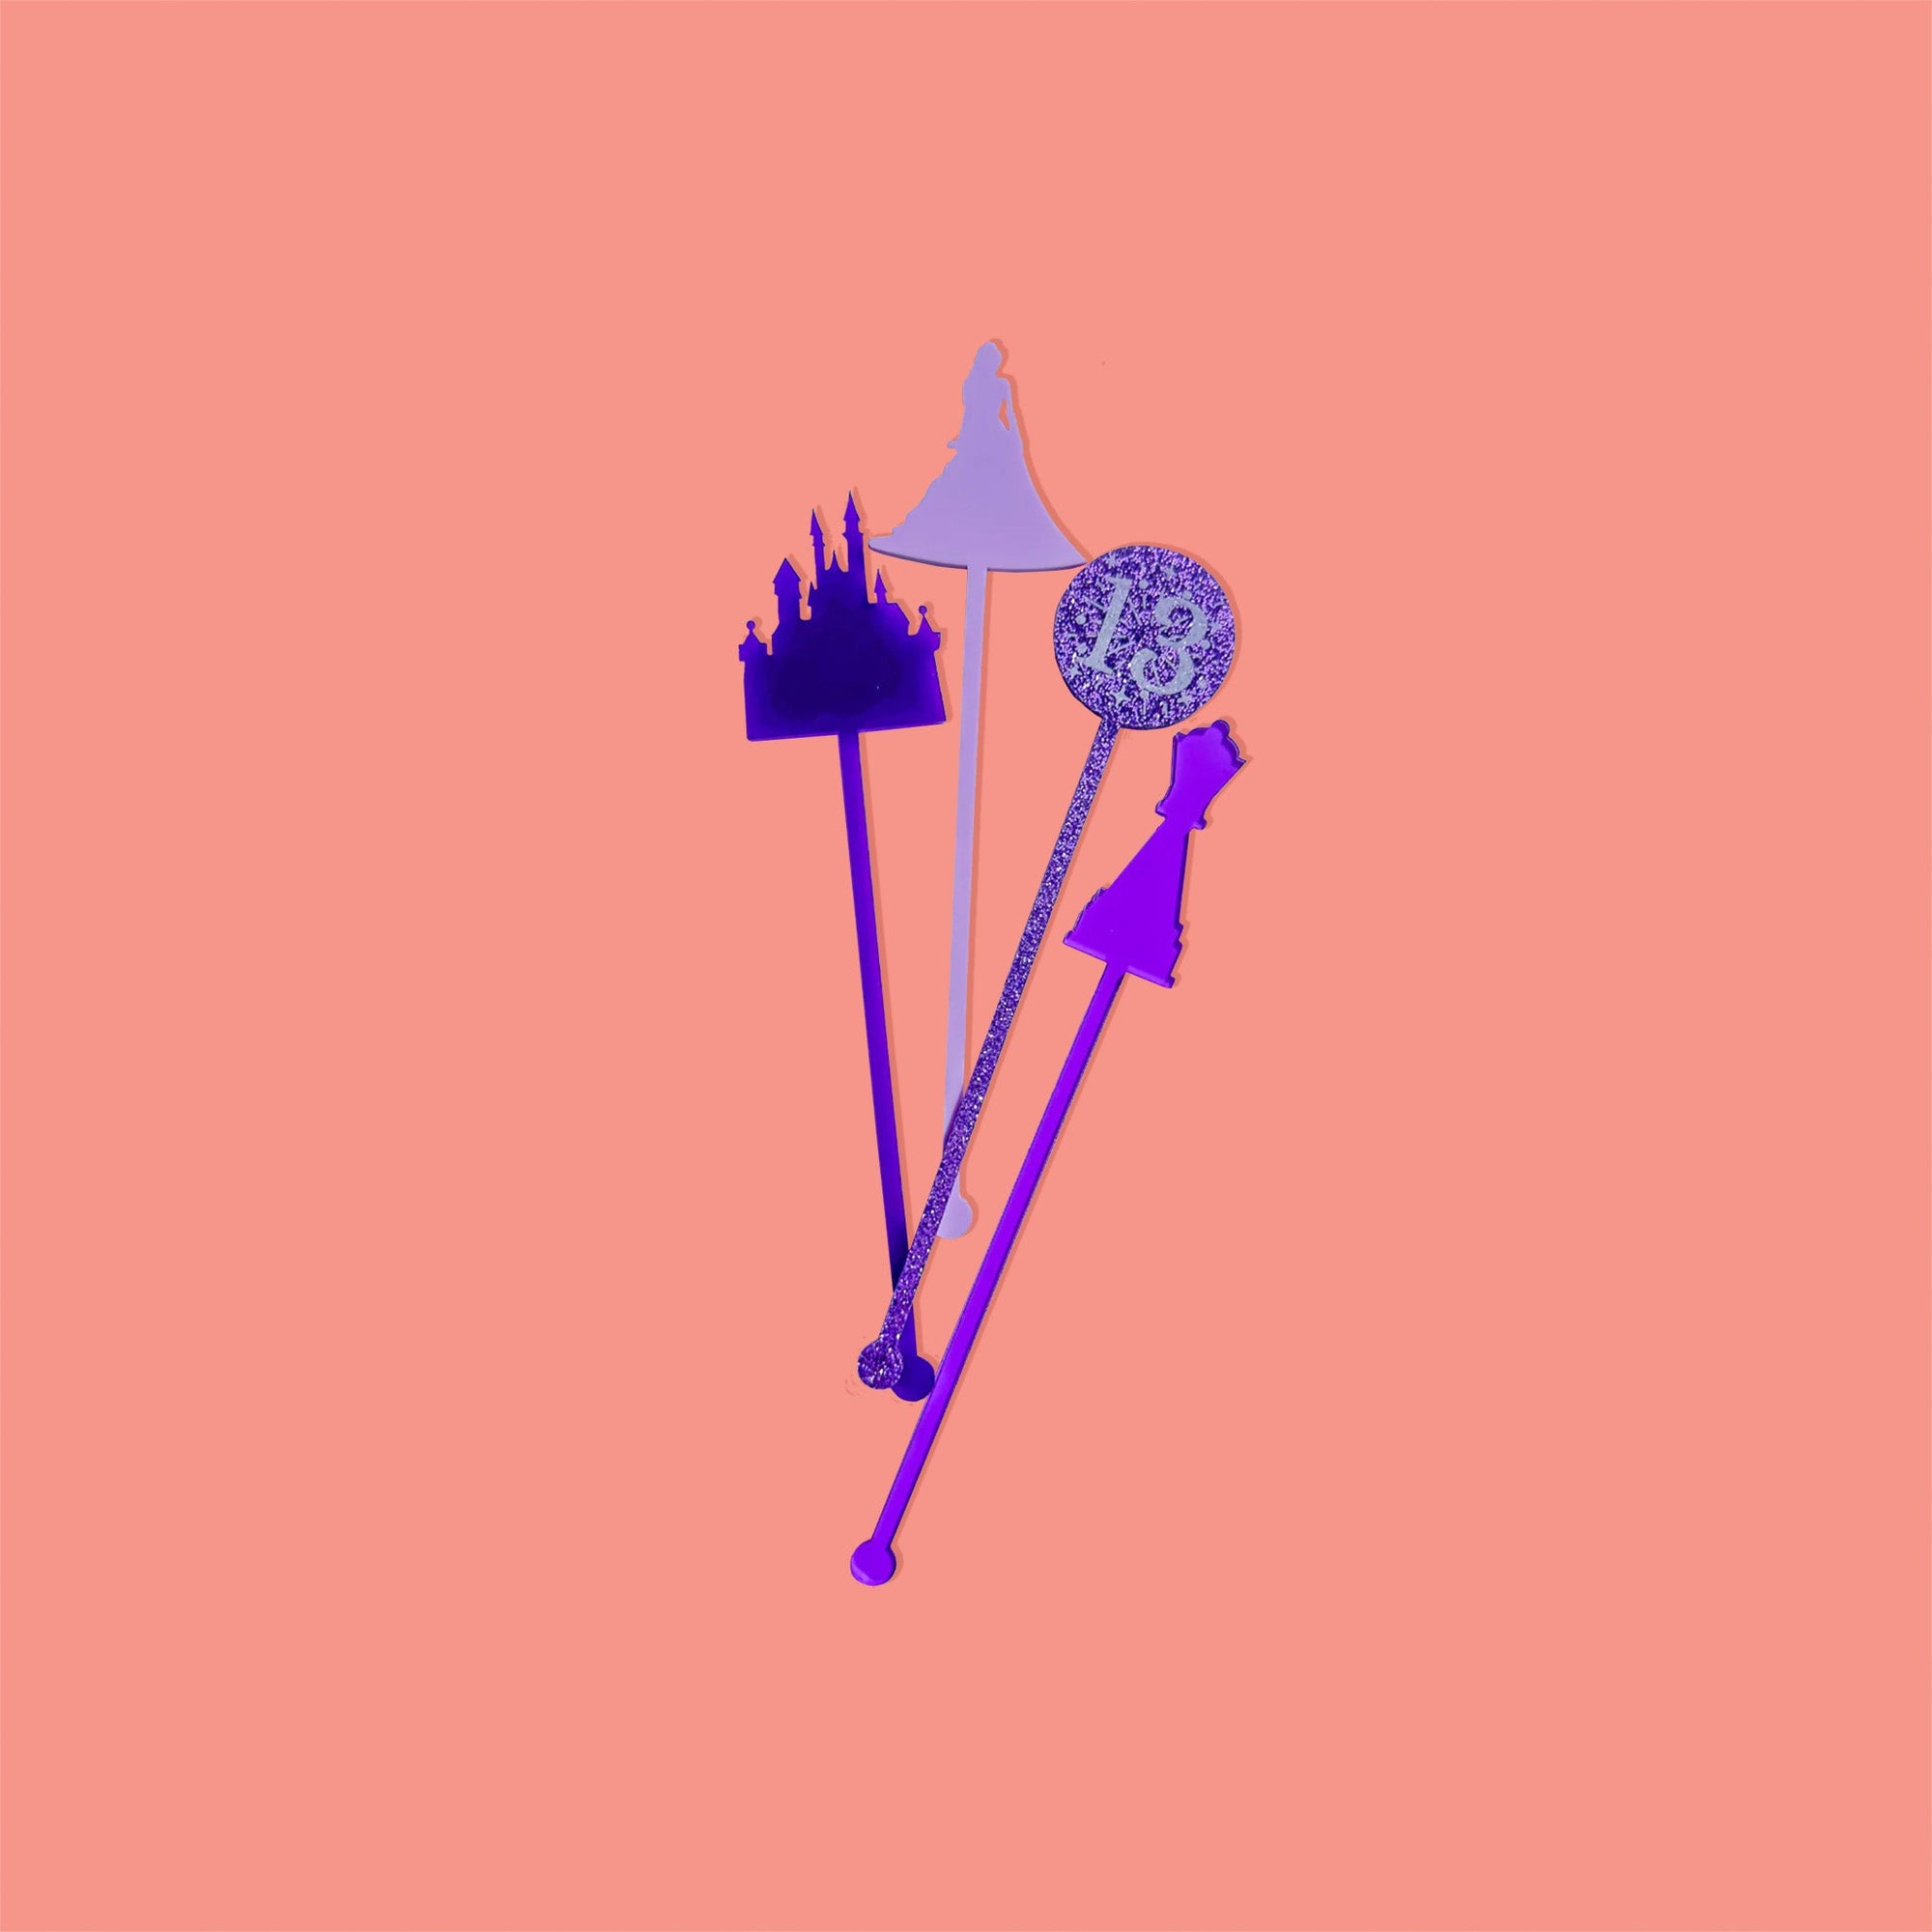 On a coral pink background sits acrylic stirrers. This Taylor Swift inspired set of 4 stirrers includes a purple opaque castle, a purple transparent chess piece, a purple glitter 13 sparkler, and a lilac opaque enchanted dress.